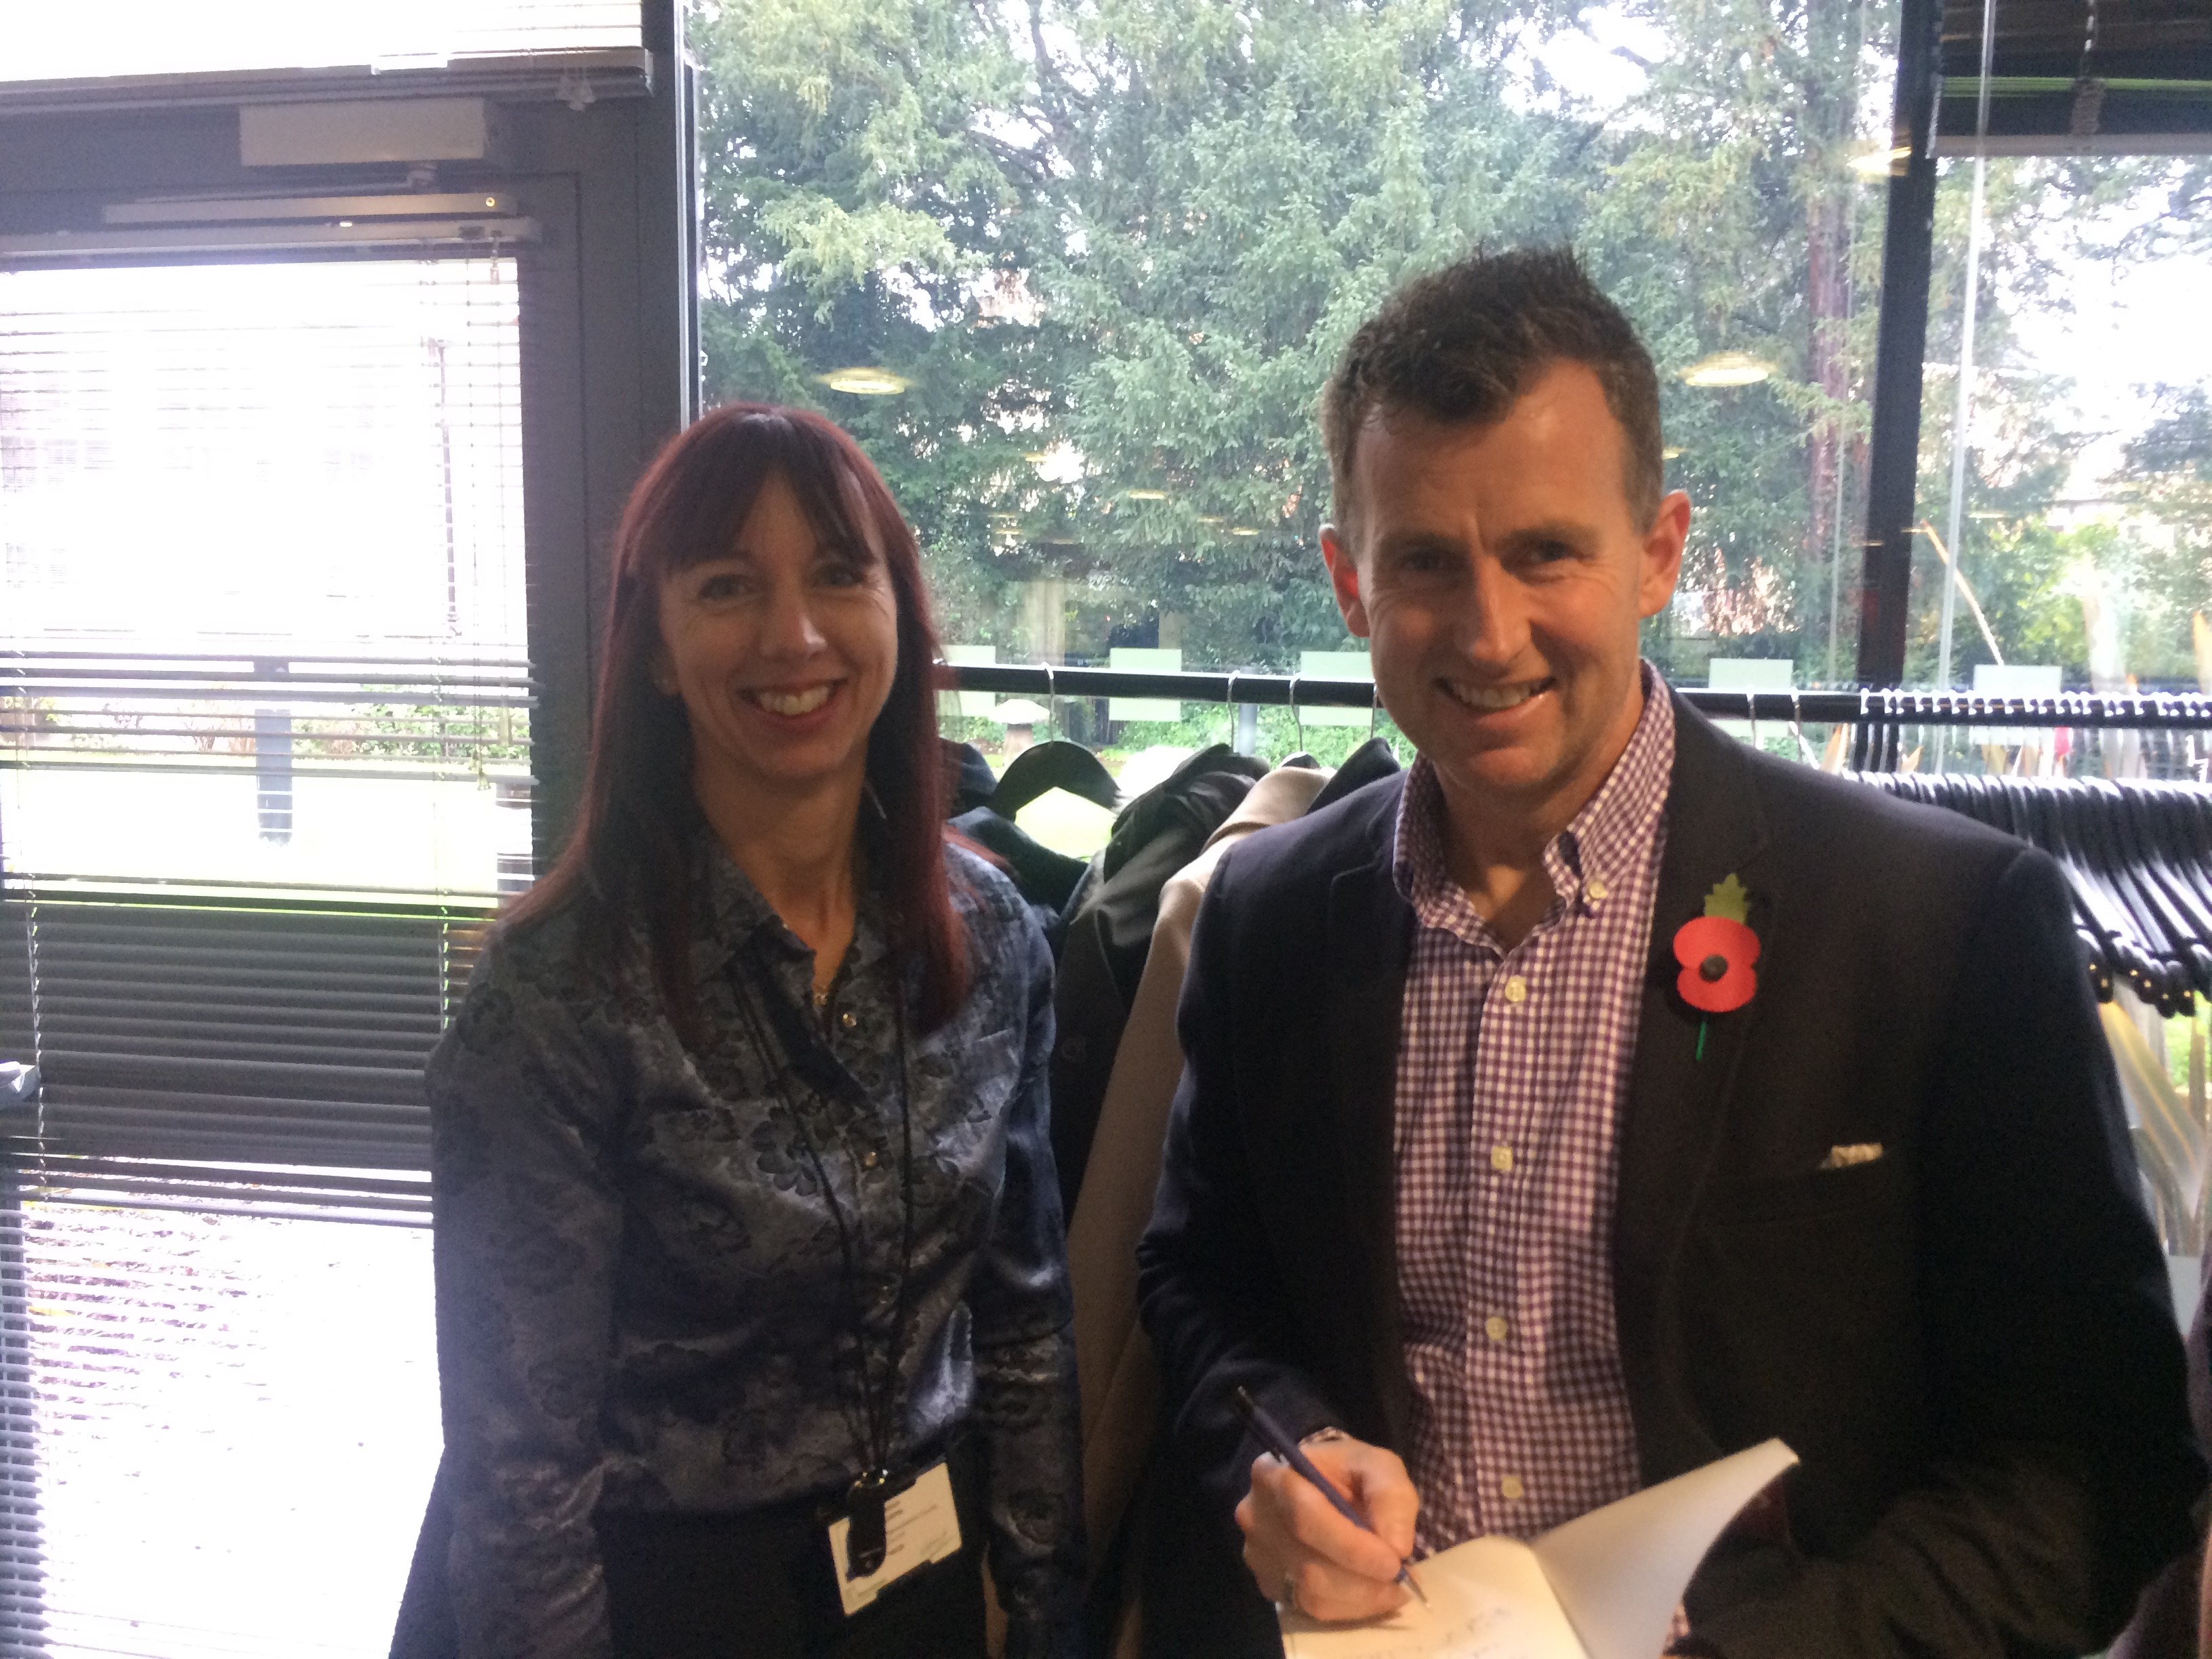 Sarah Turpin with international rugby player Nigel Owens at a WCC speaker event in November 2016.